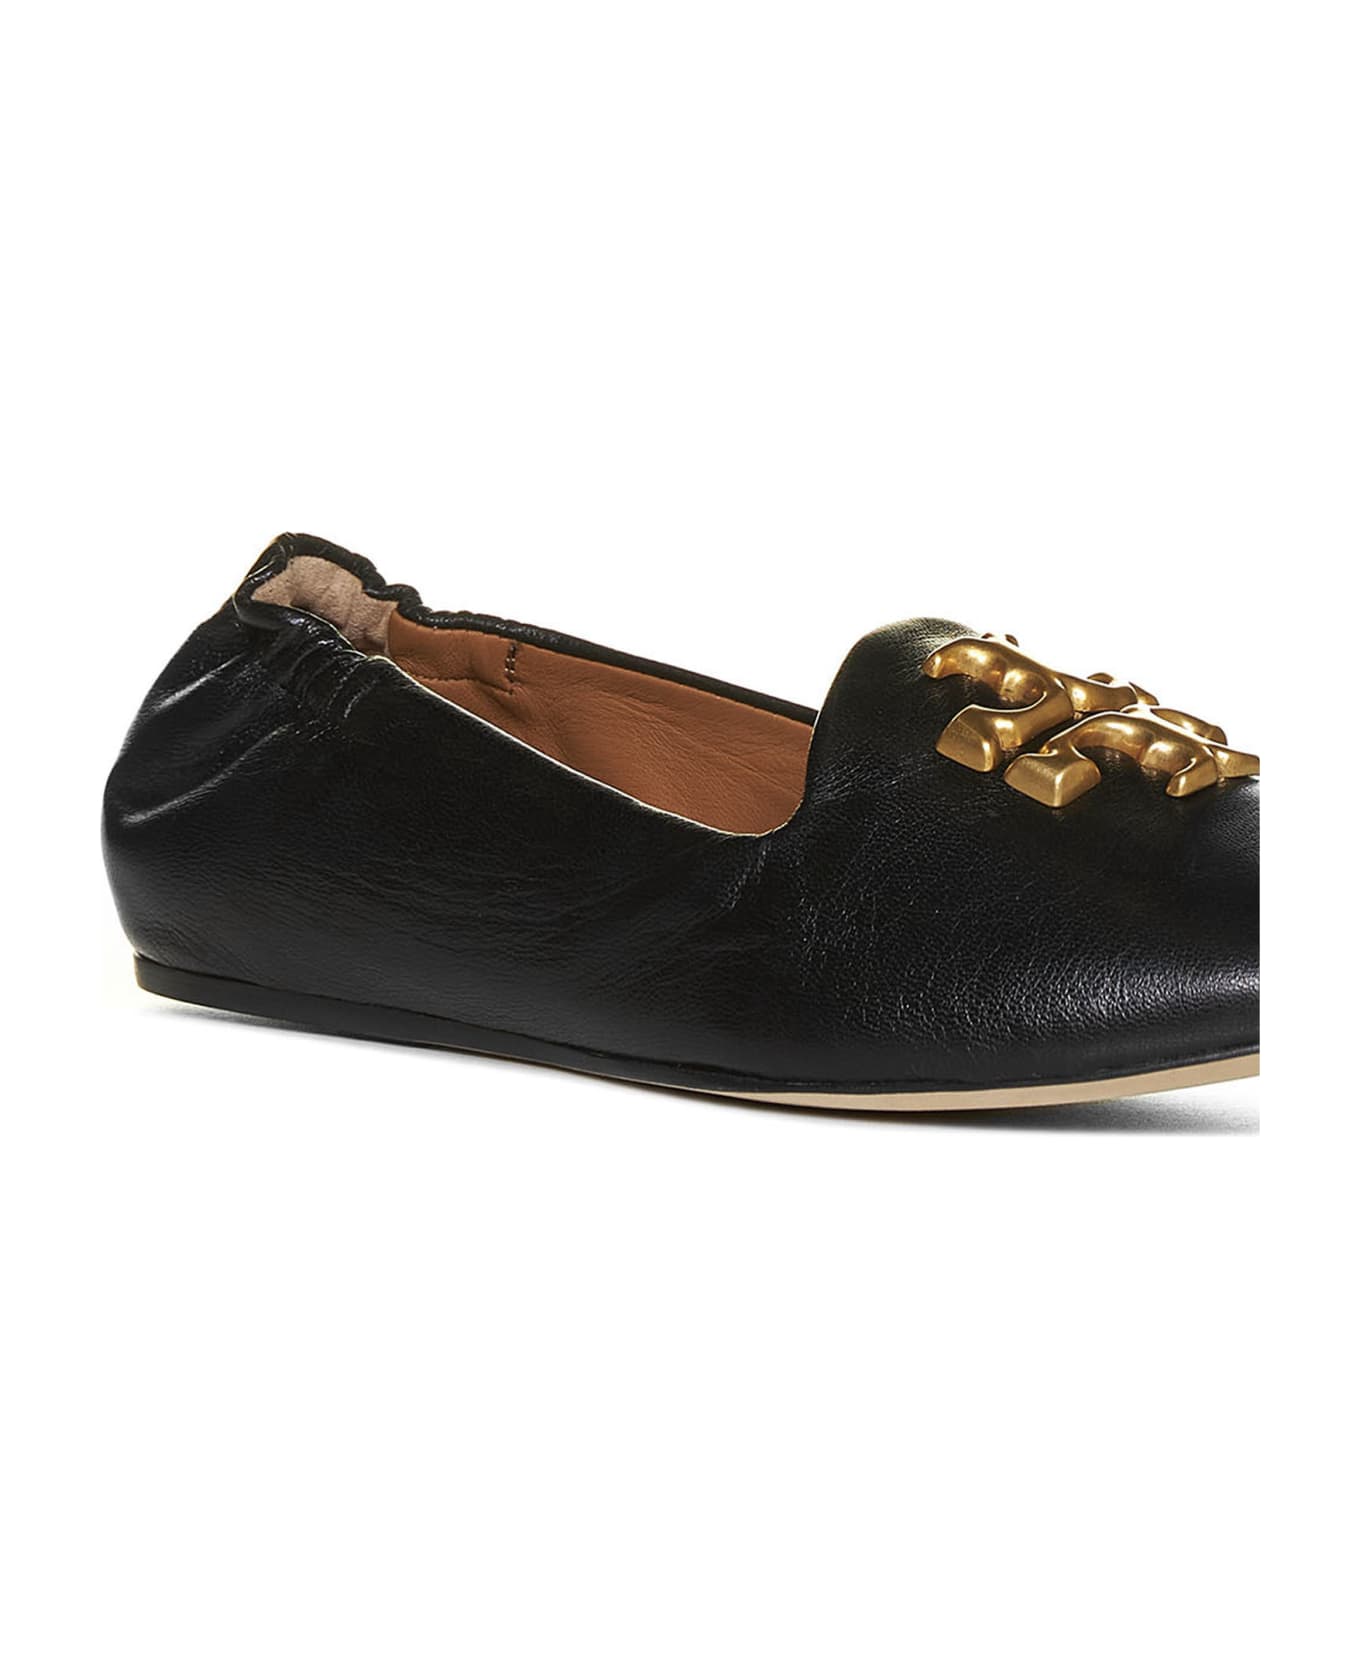 Tory Burch Eleanor Loafers - Perfect black